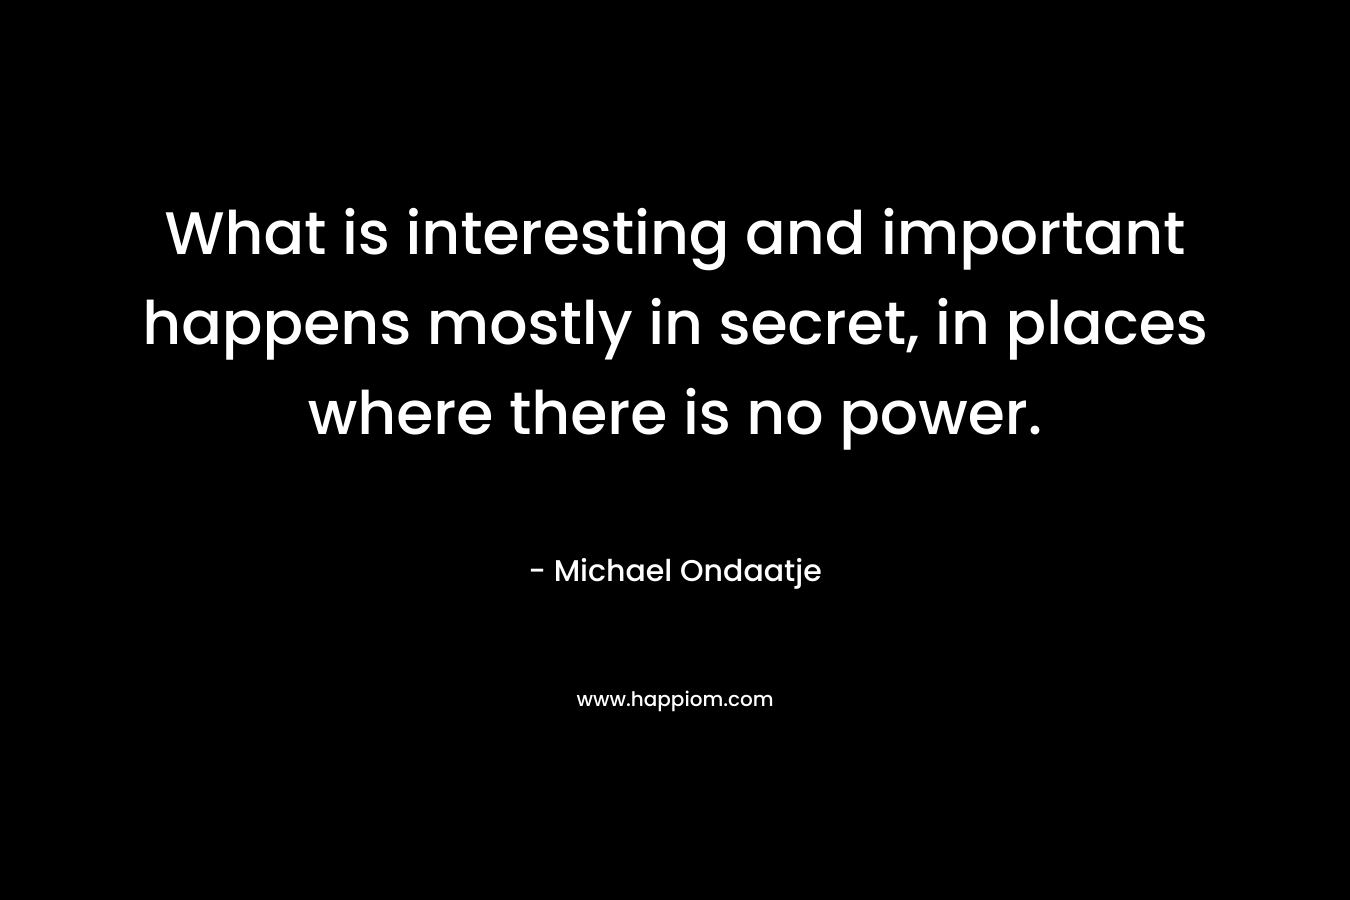 What is interesting and important happens mostly in secret, in places where there is no power. – Michael Ondaatje